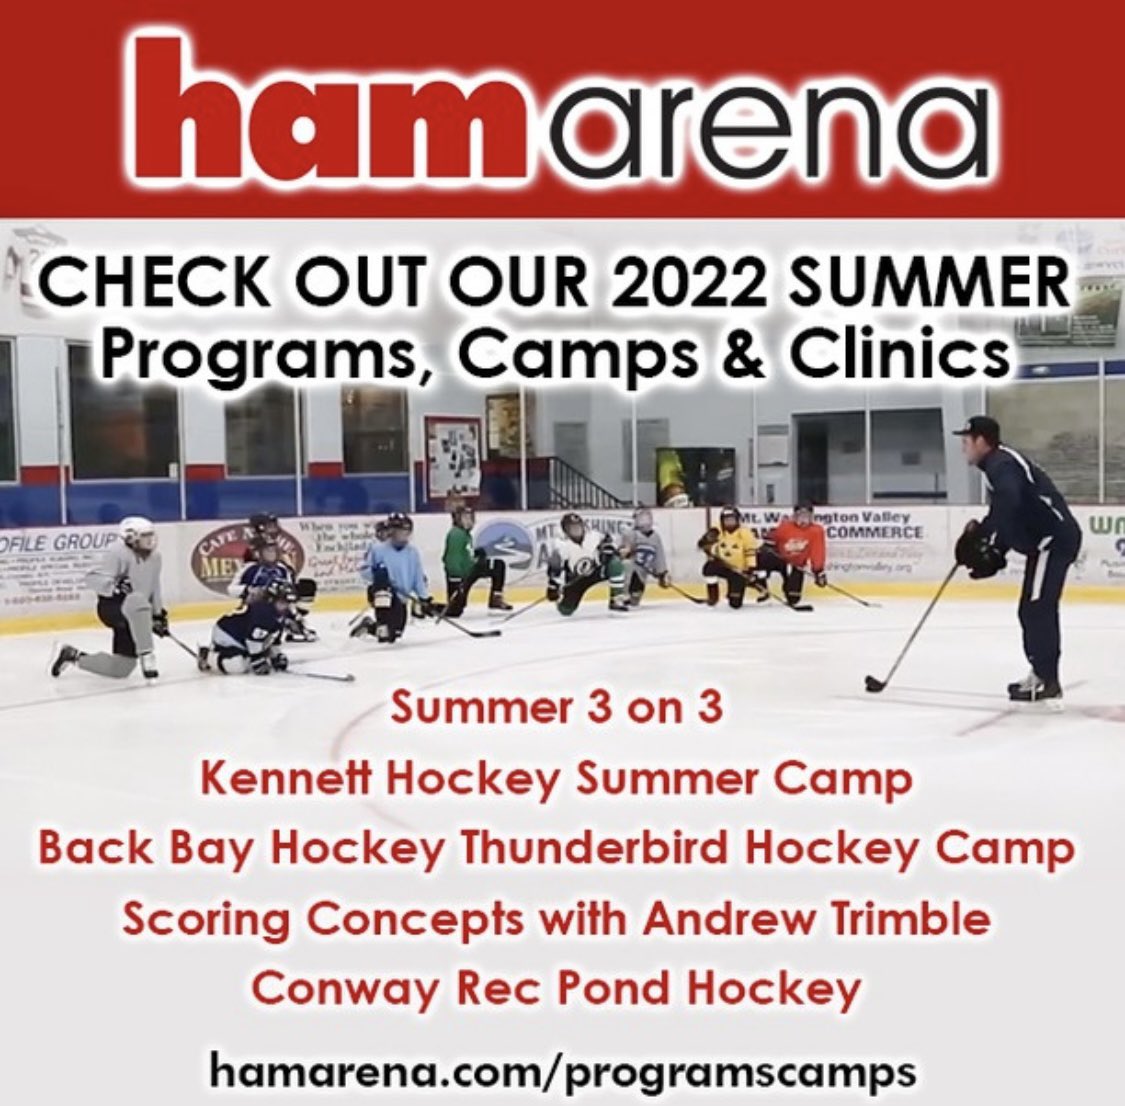 Returning to the Ham Arena in Conway, NH this summer on Tuesday nights!  

Check out the full summer programming on the Ham Arena website!

hamarena.com/programscamps/

#scoringconcepts #summerhockey #hockeycamps